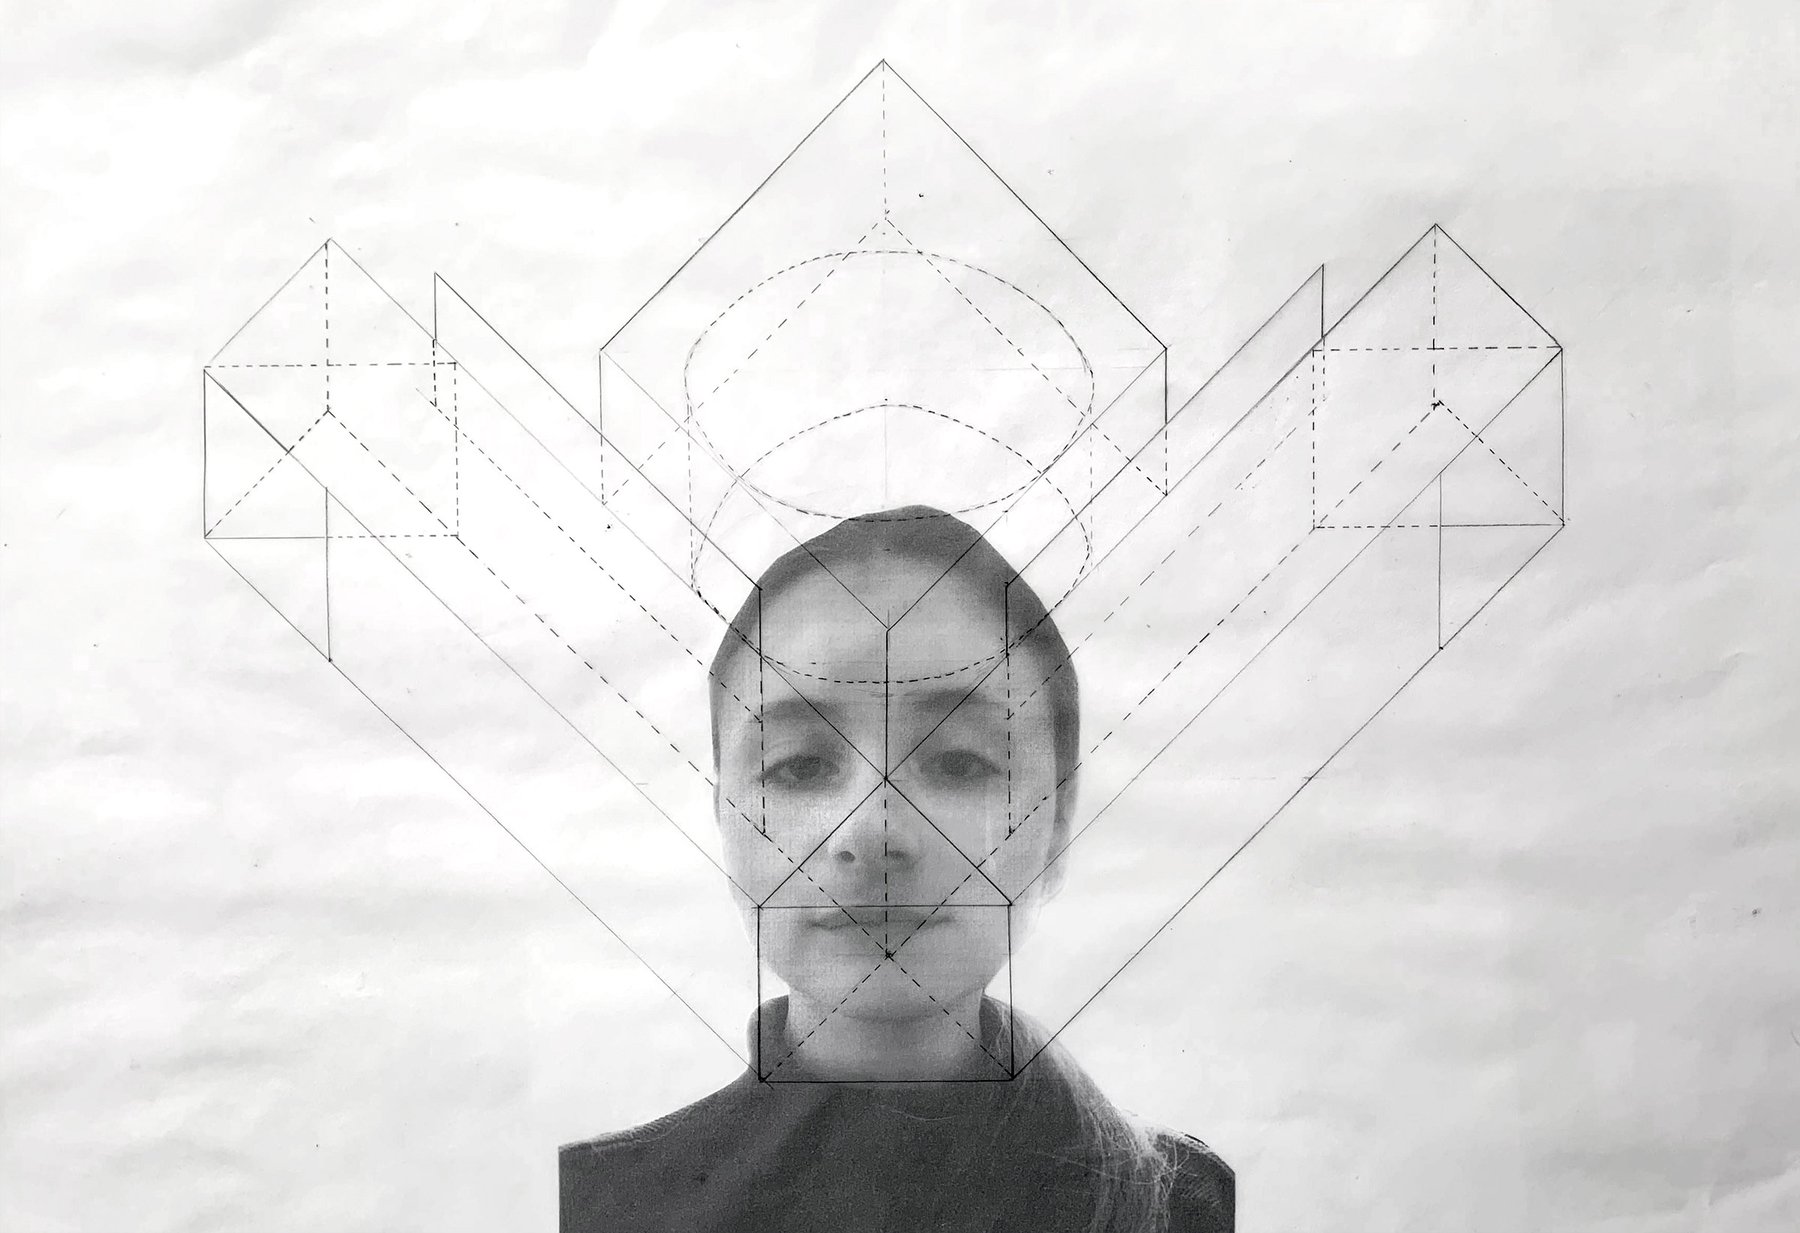 An image of a black and white printed photo of the student's head is seen in the middle of the drawing. On top there is a linedrawing showing a device in axonometric as if it would sit on her head